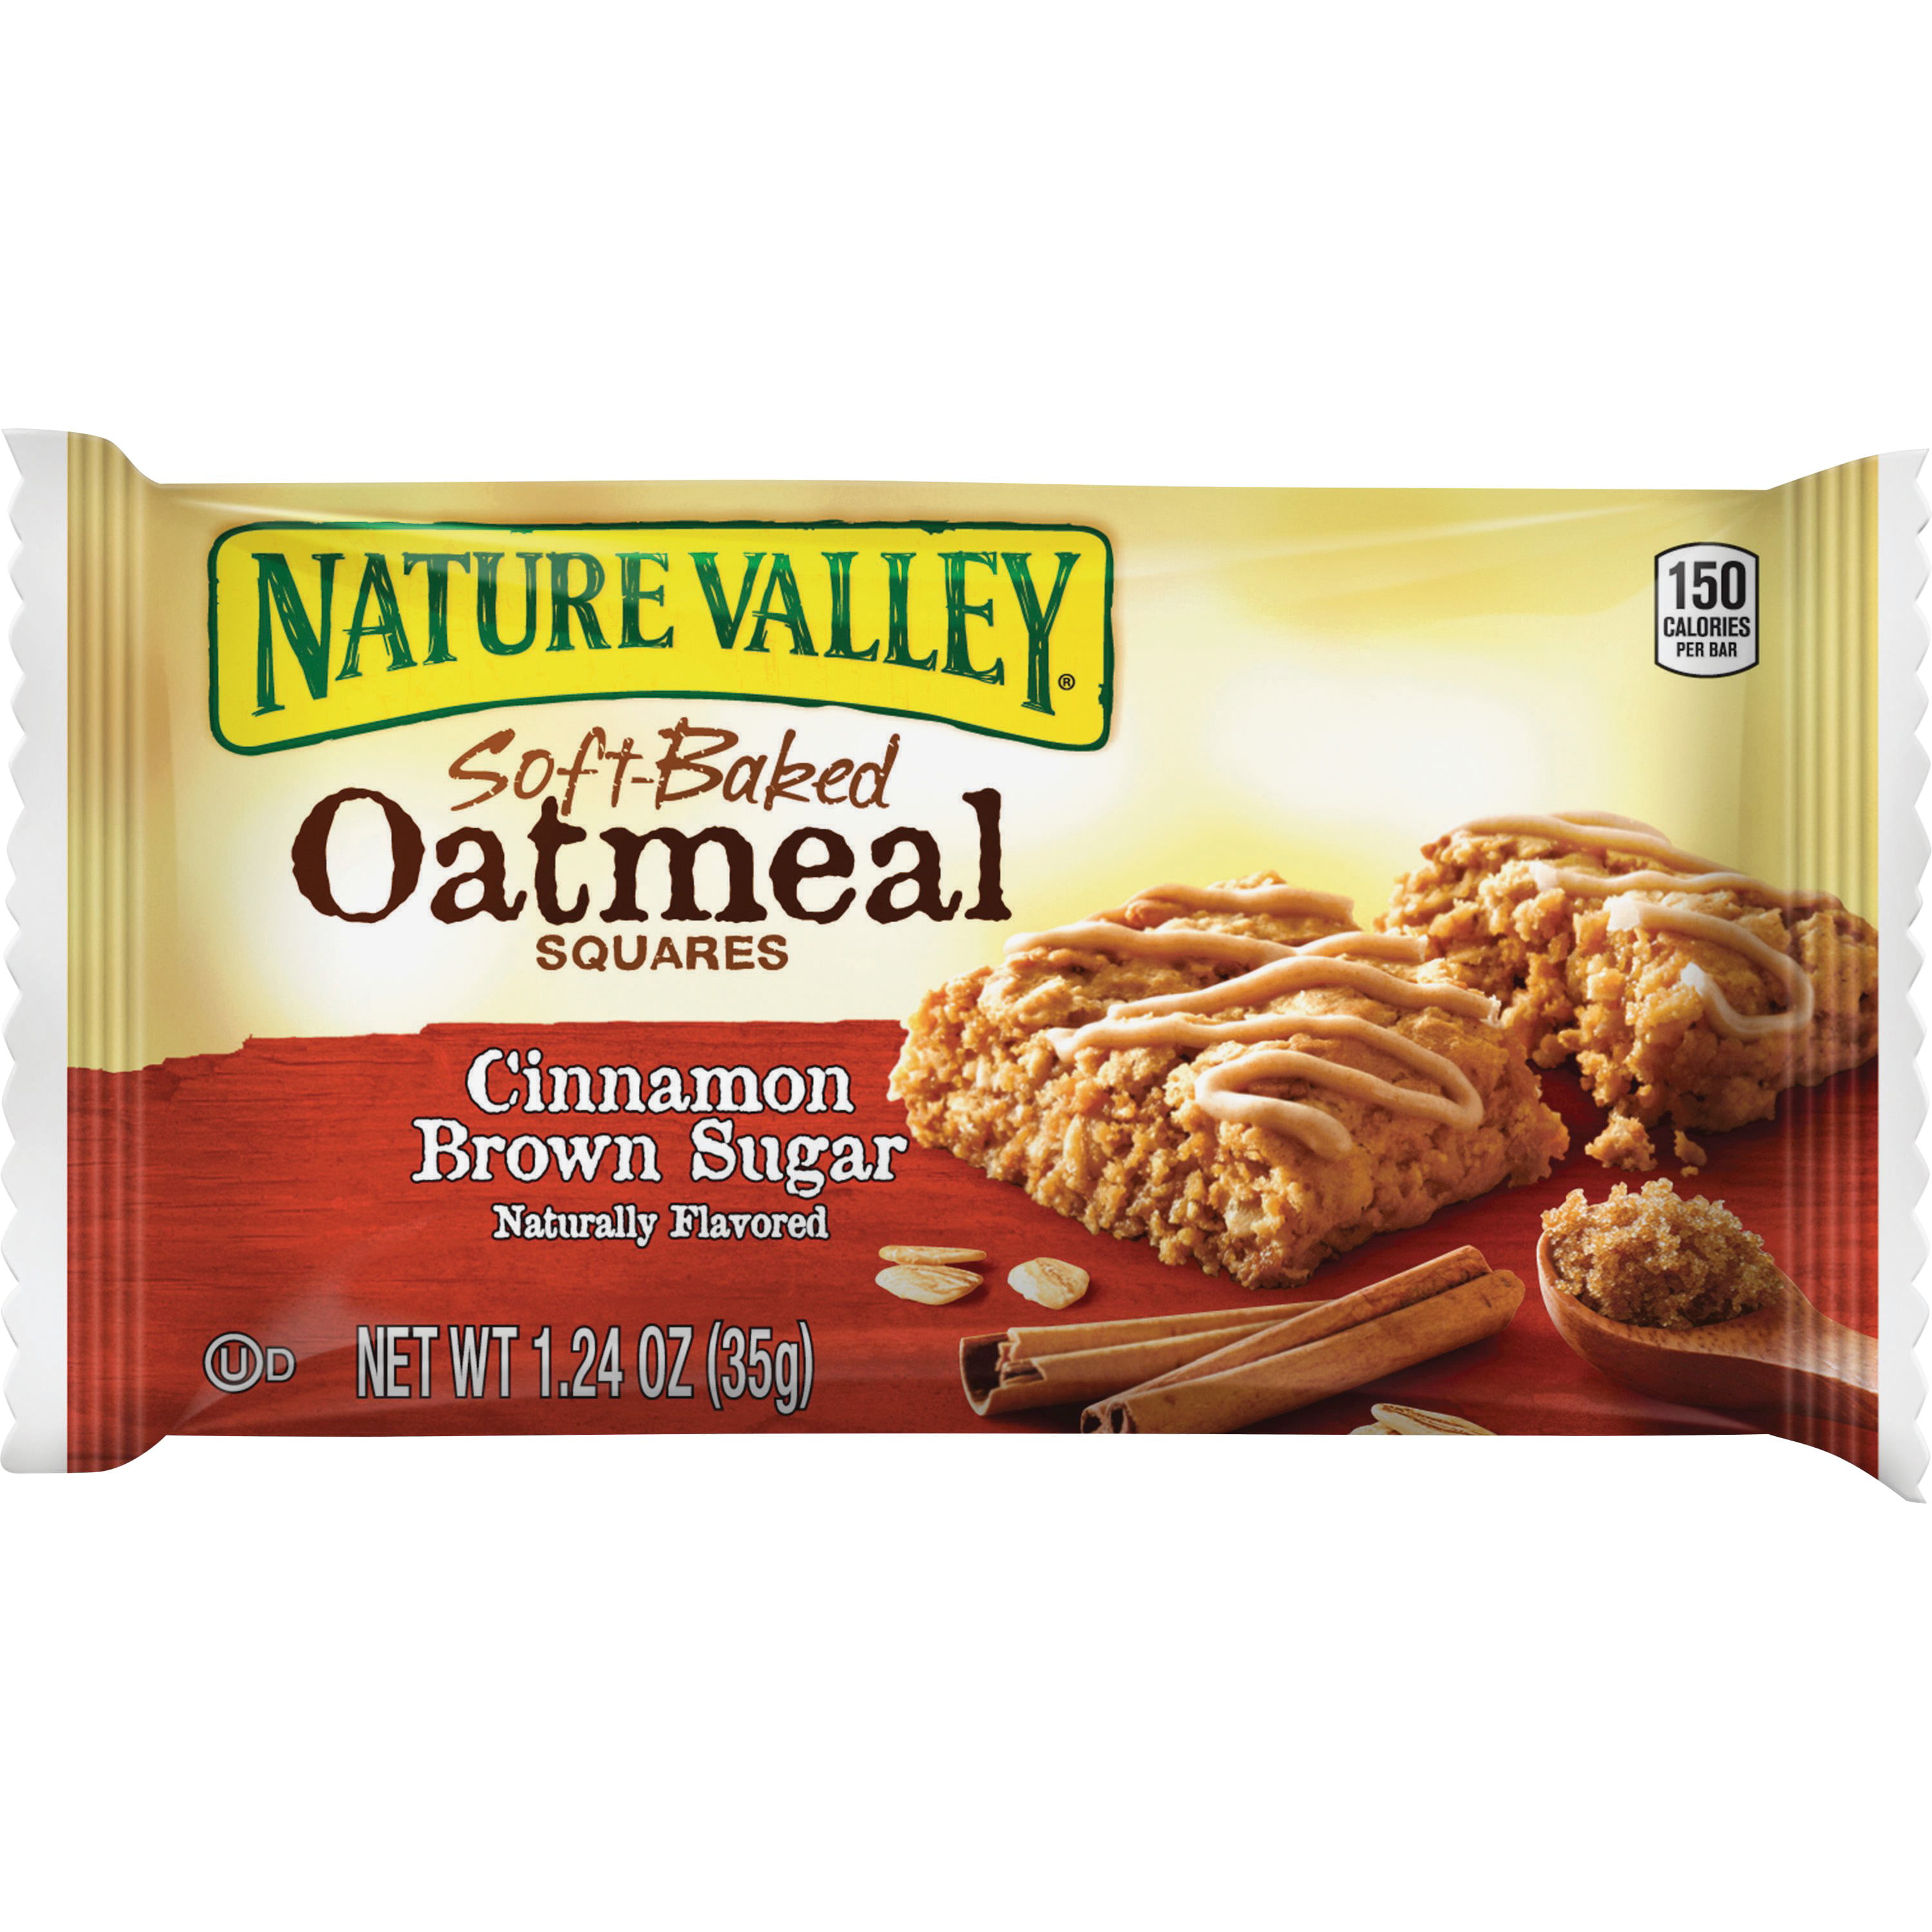 nature-valley-gnmsn43401-nature-valley-soft-baked-oatmeal-bars-15